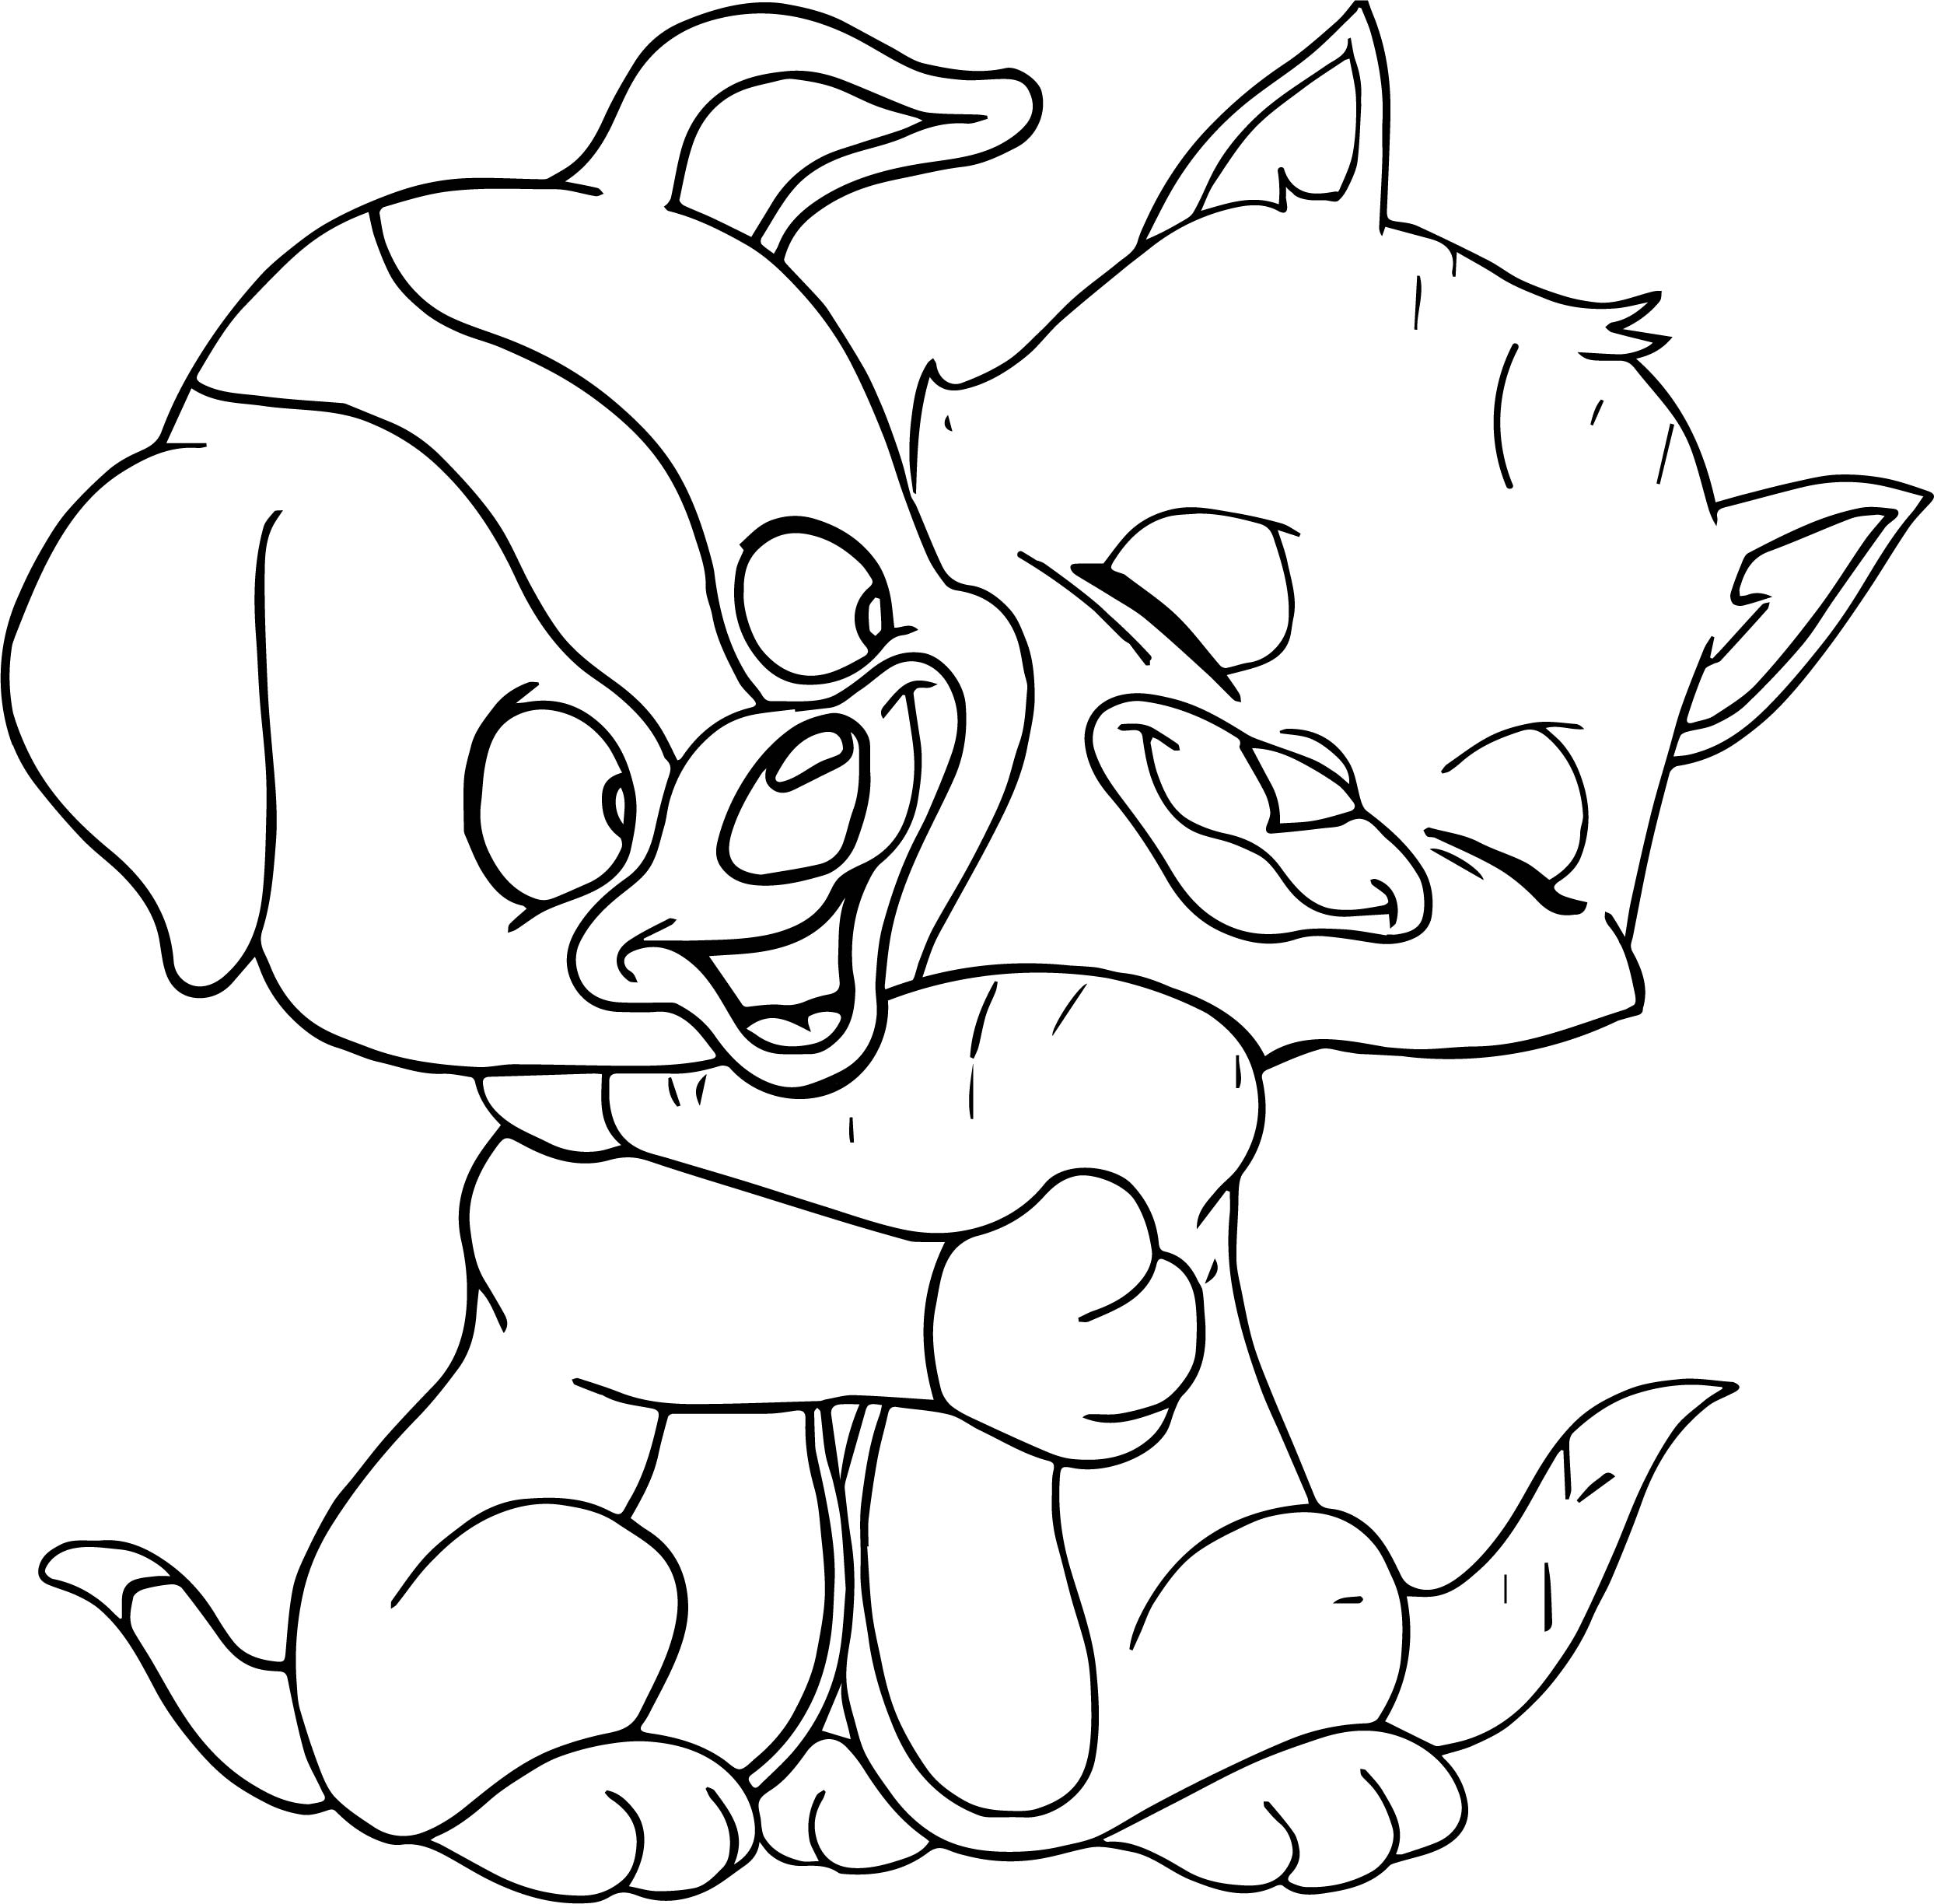 Catdog Coloring Pages at Free printable colorings